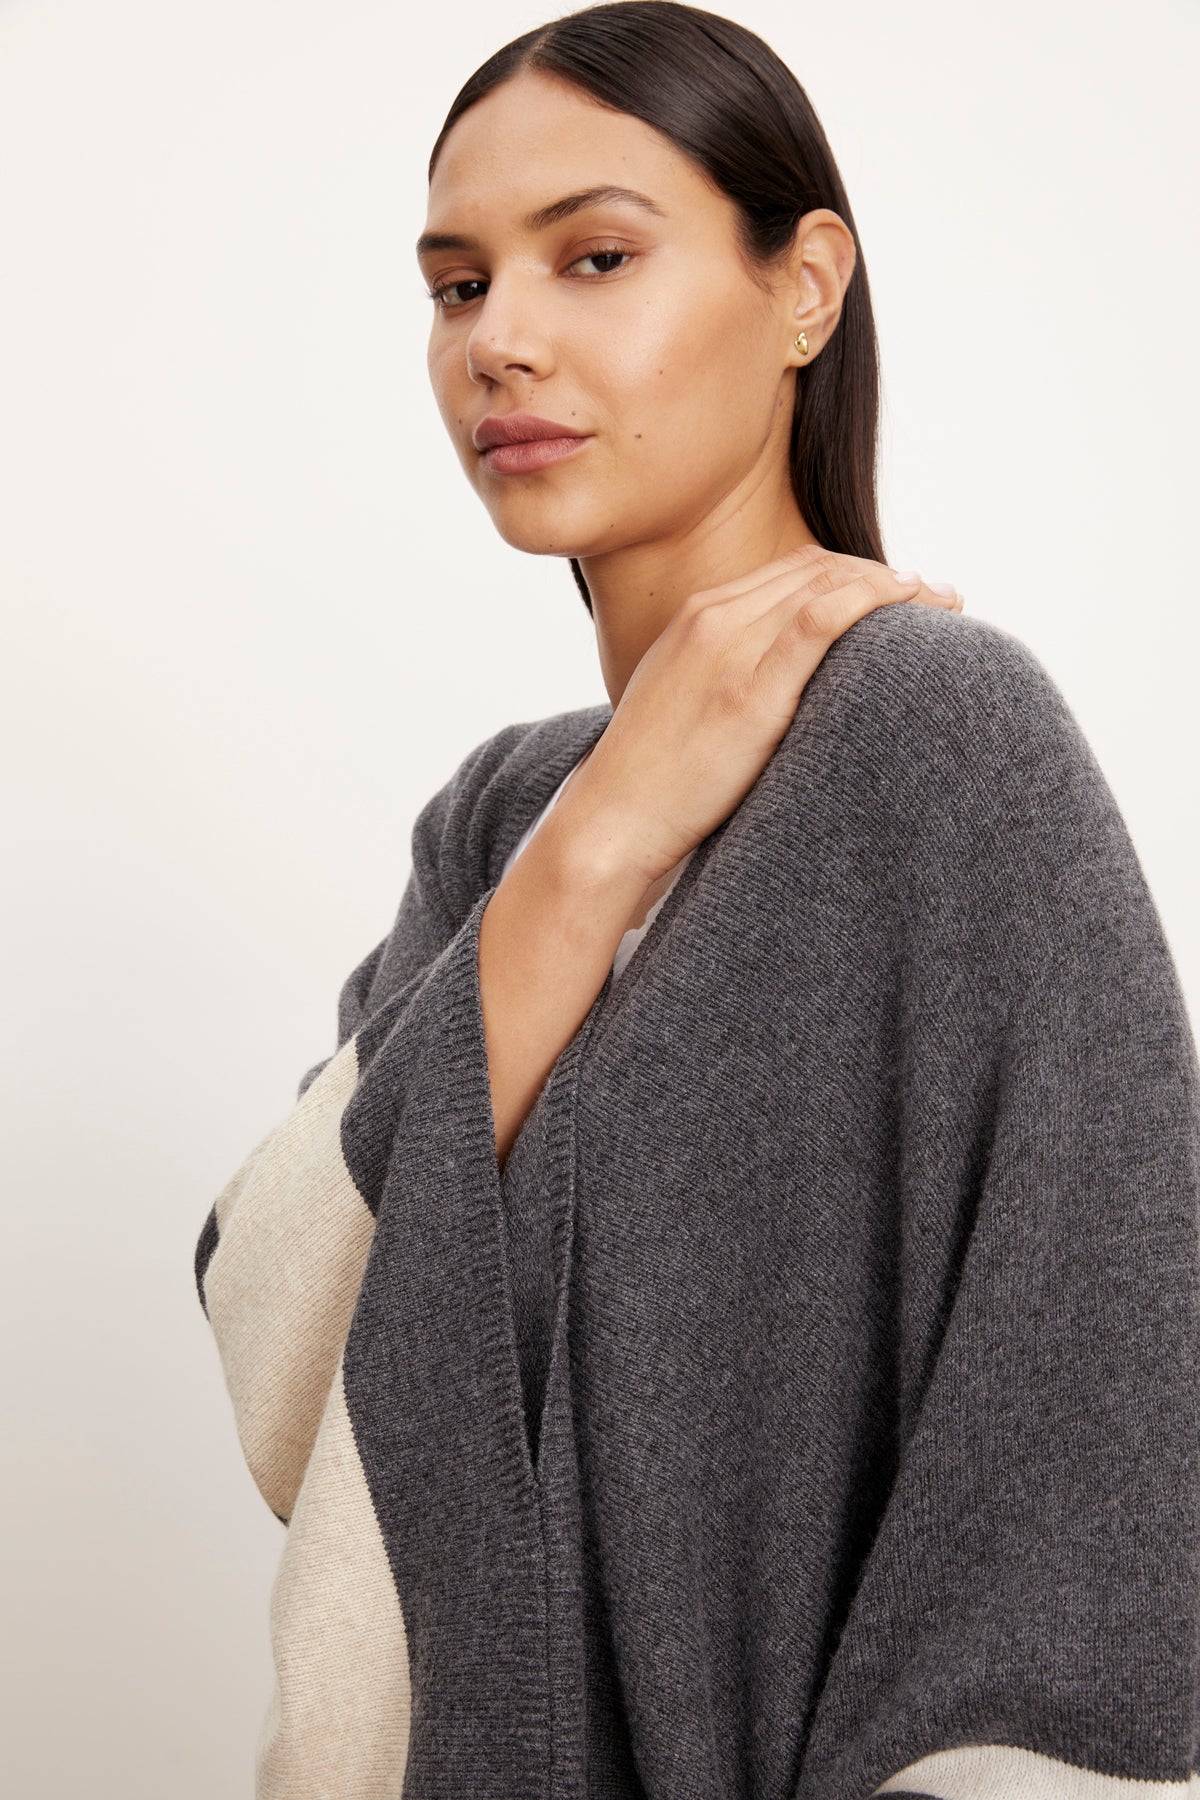 The model is wearing a Velvet by Graham & Spencer HARPER OPEN FRONT PONCHO in grey and beige.-26897793188033